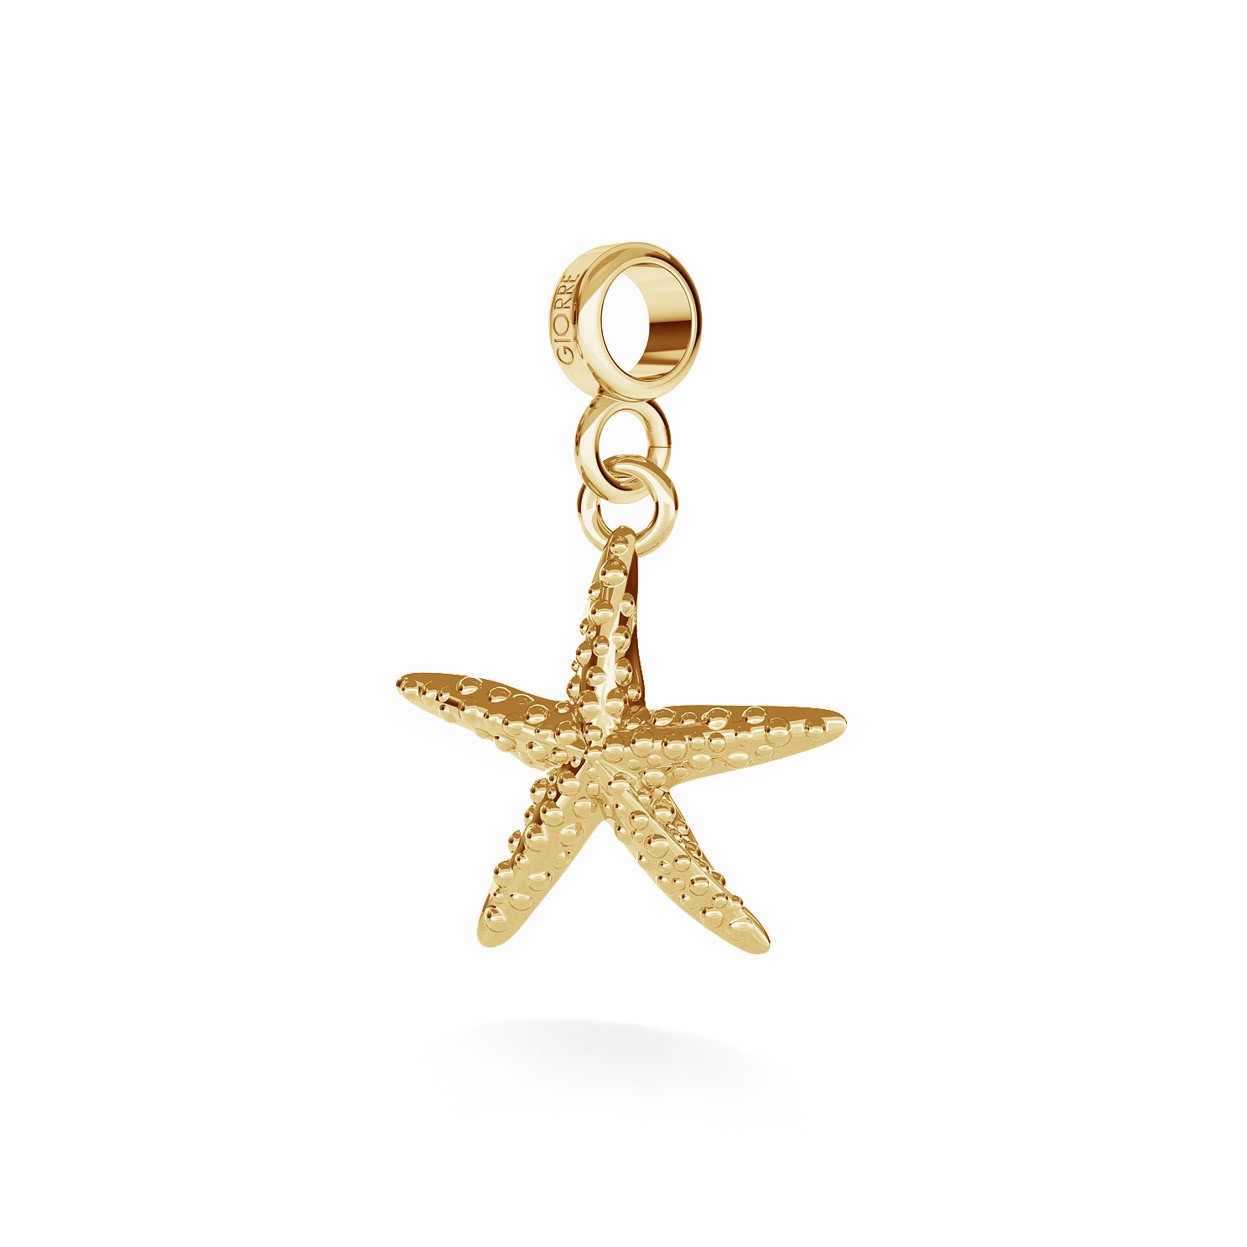 CHARM 19, STARFISH, SILVER 925,  RHODIUM OR GOLD PLATED